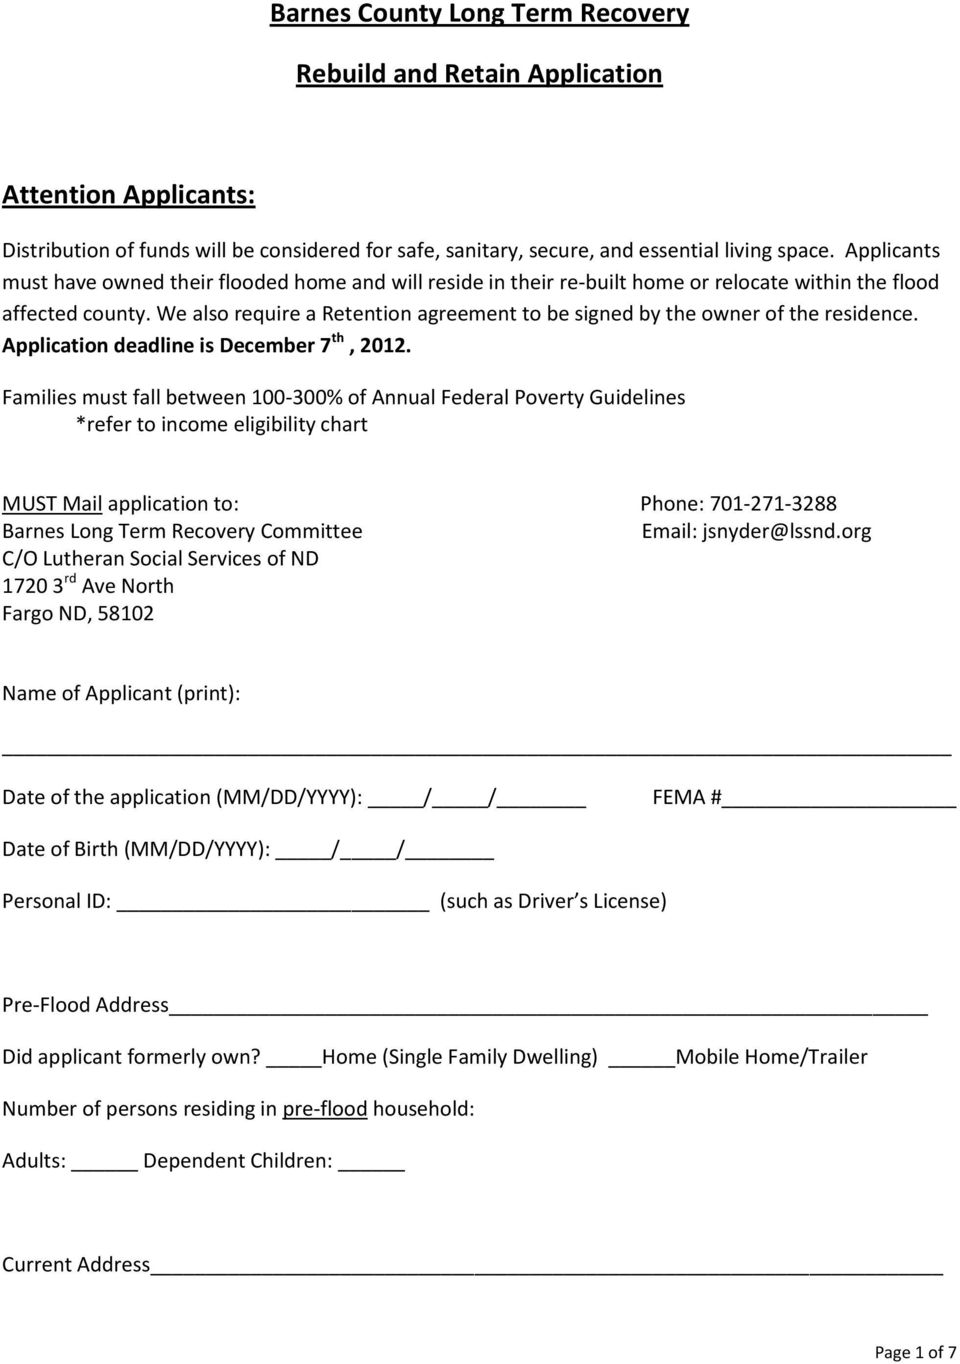 We also require a Retention agreement to be signed by the owner of the residence. Application deadline is December 7 th, 2012.